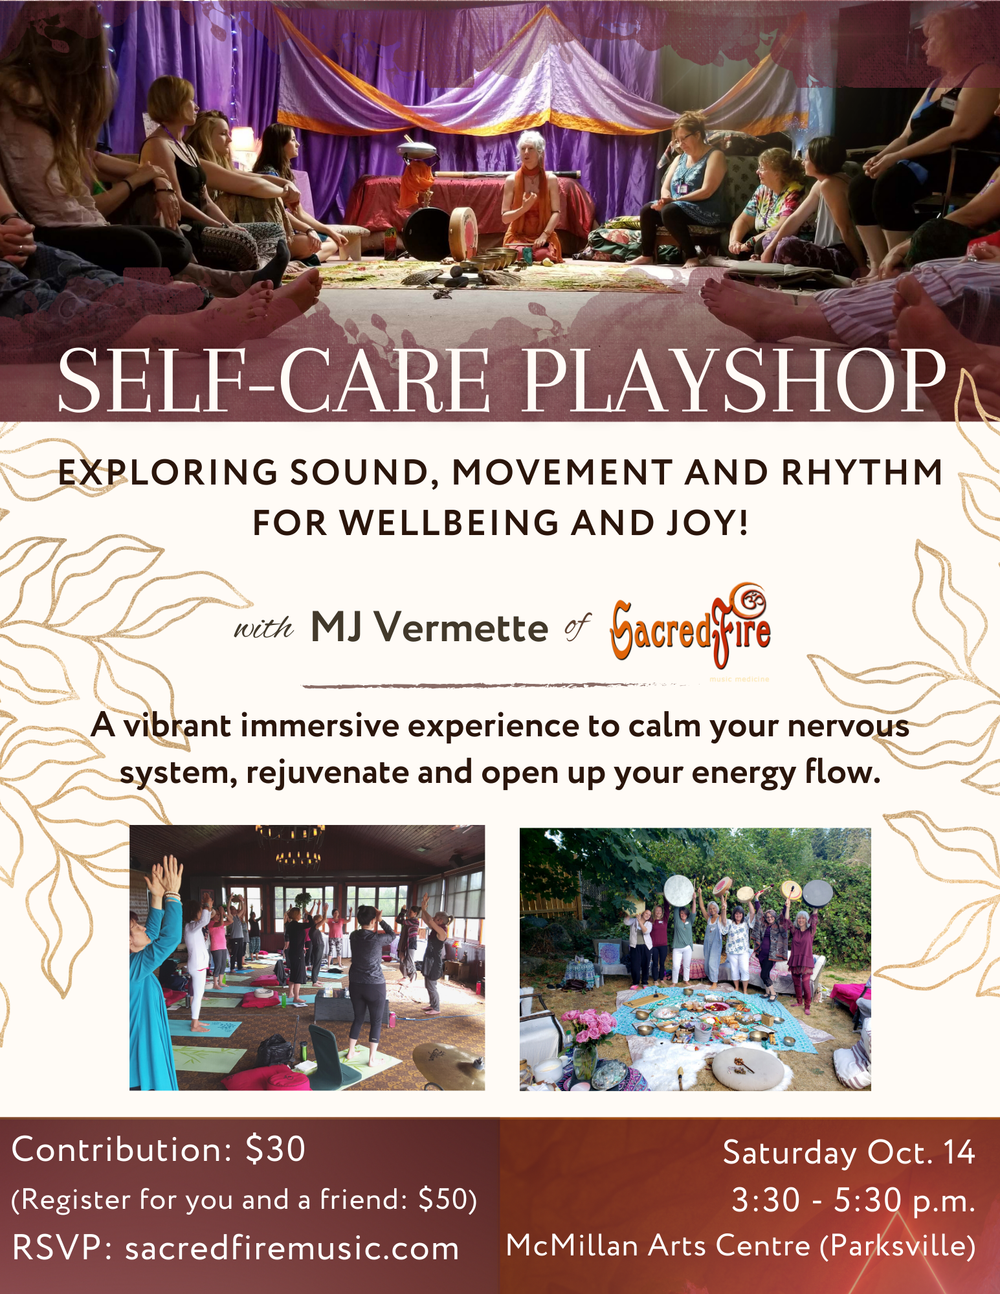 POSTER SOUND, MOVEMENT AND RHYTHM FOR SELF-CARE PLAYSHOP